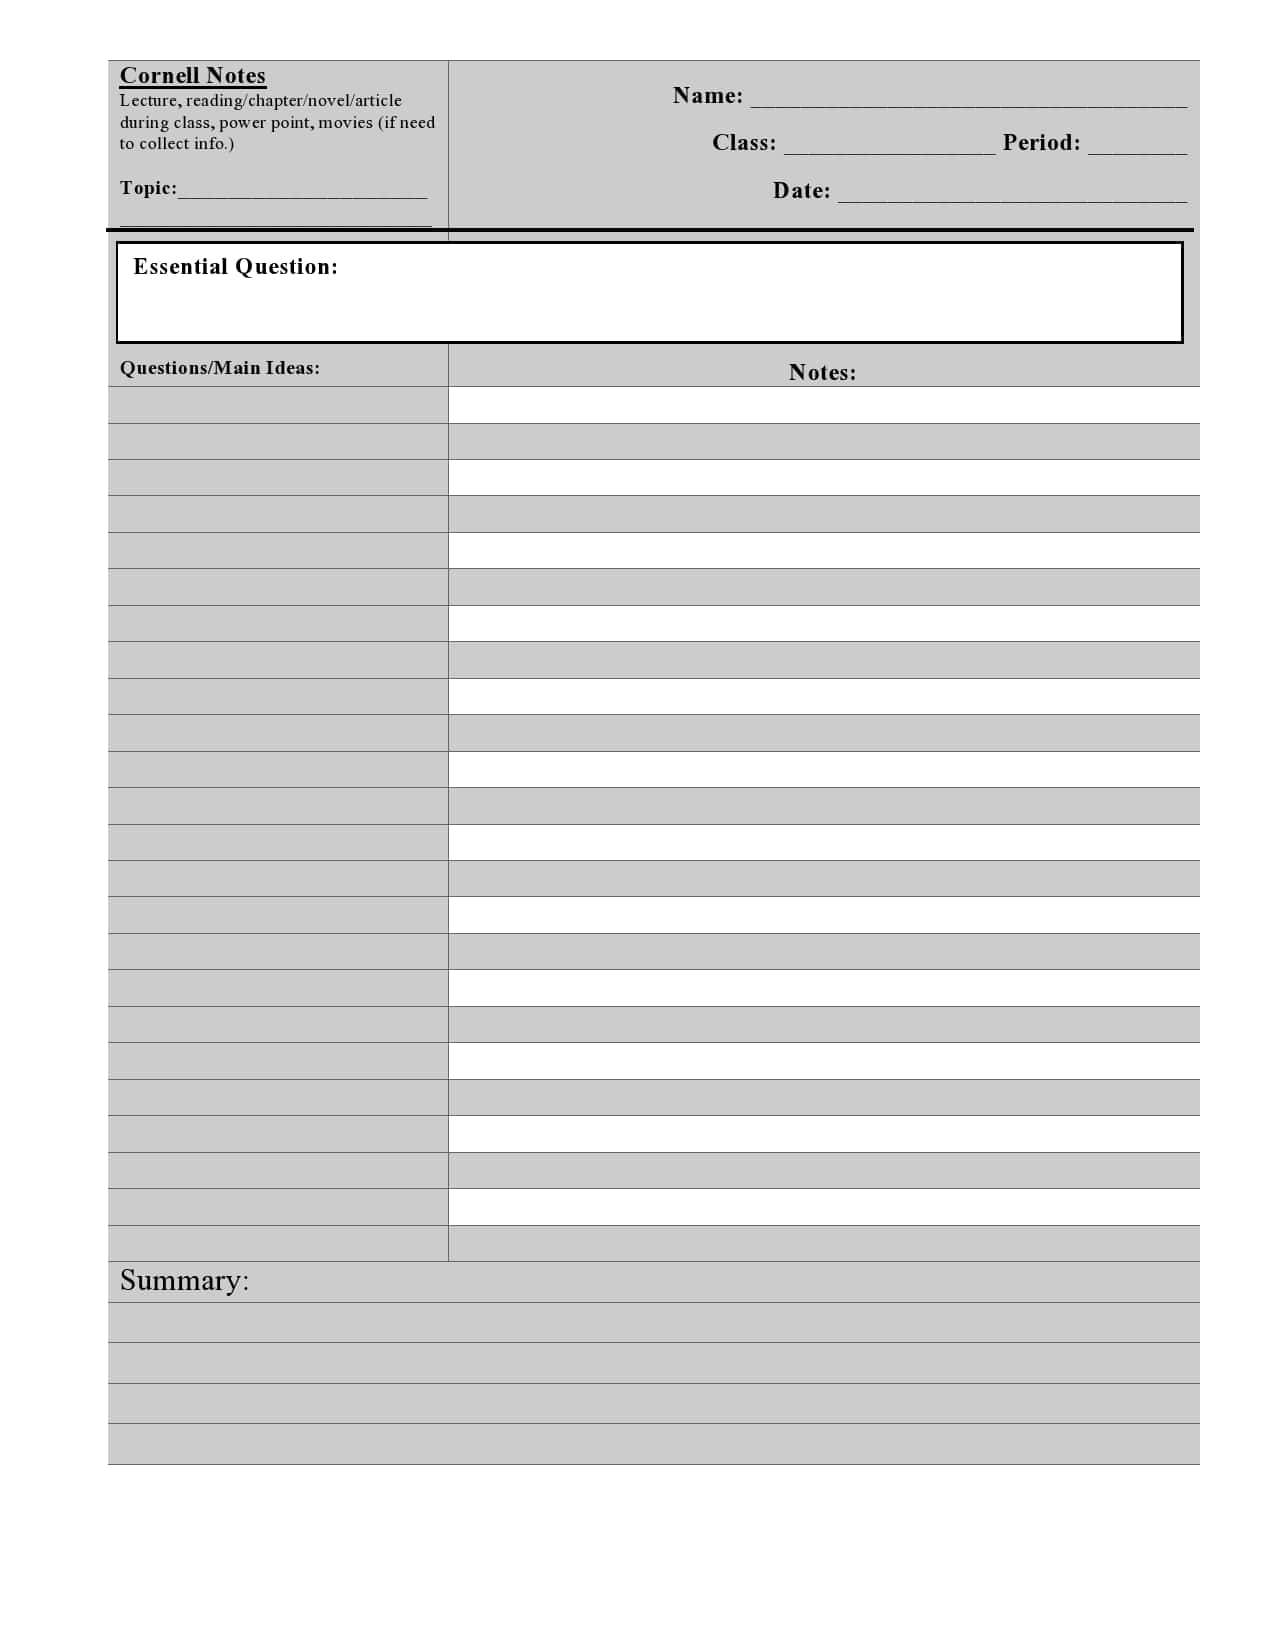 23 Printable Cornell Notes Templates [Free] - TemplateArchive Regarding Note Taking Word Template